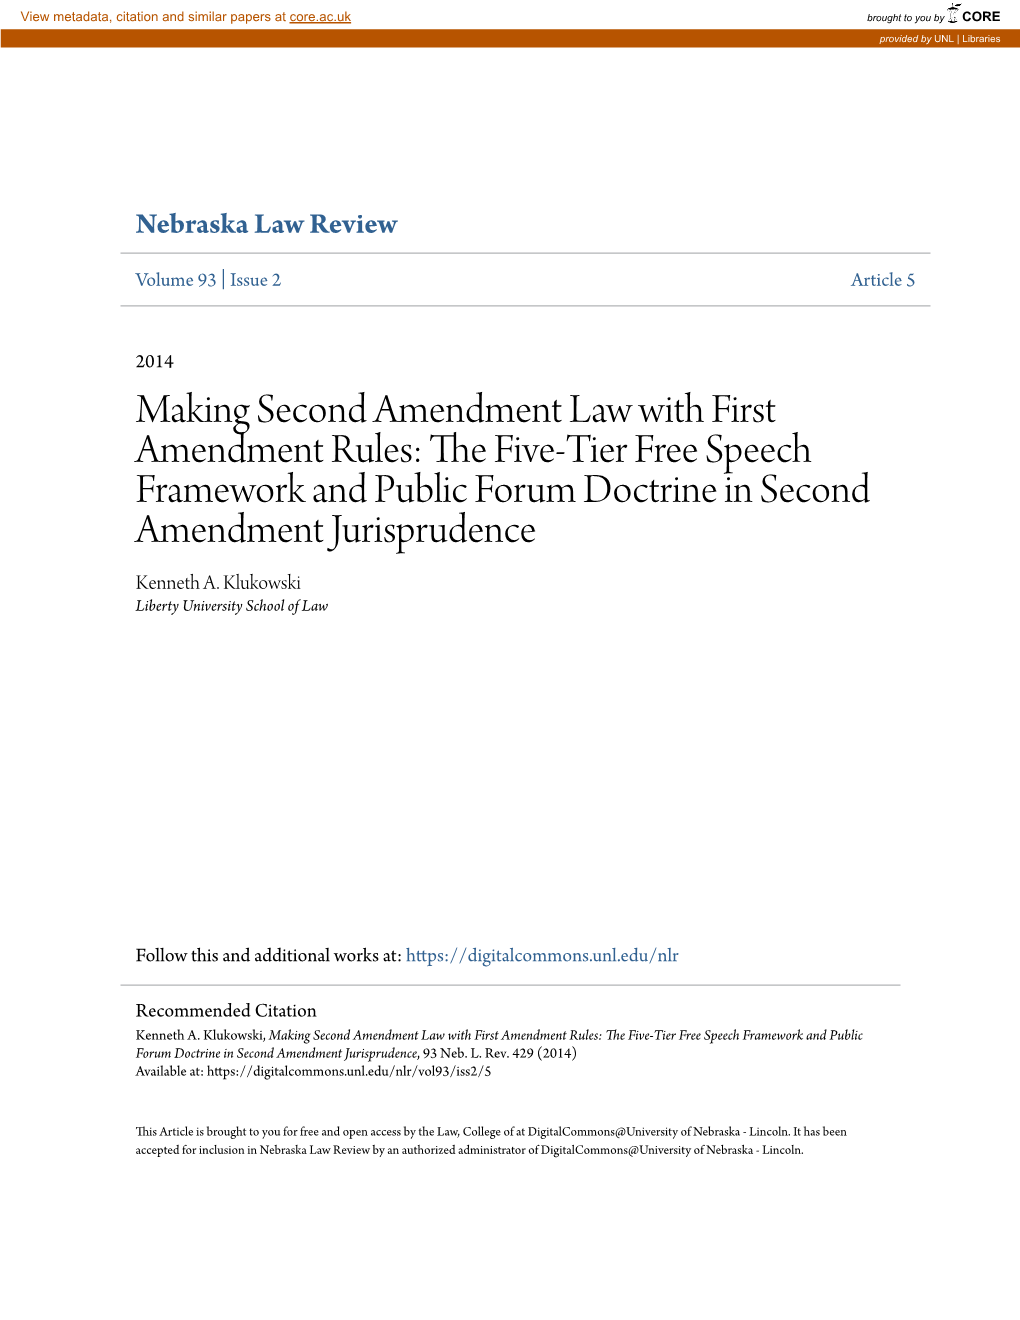 Making Second Amendment Law with First Amendment Rules: the If Ve-Tier Free Speech Framework and Public Forum Doctrine in Second Amendment Jurisprudence Kenneth A